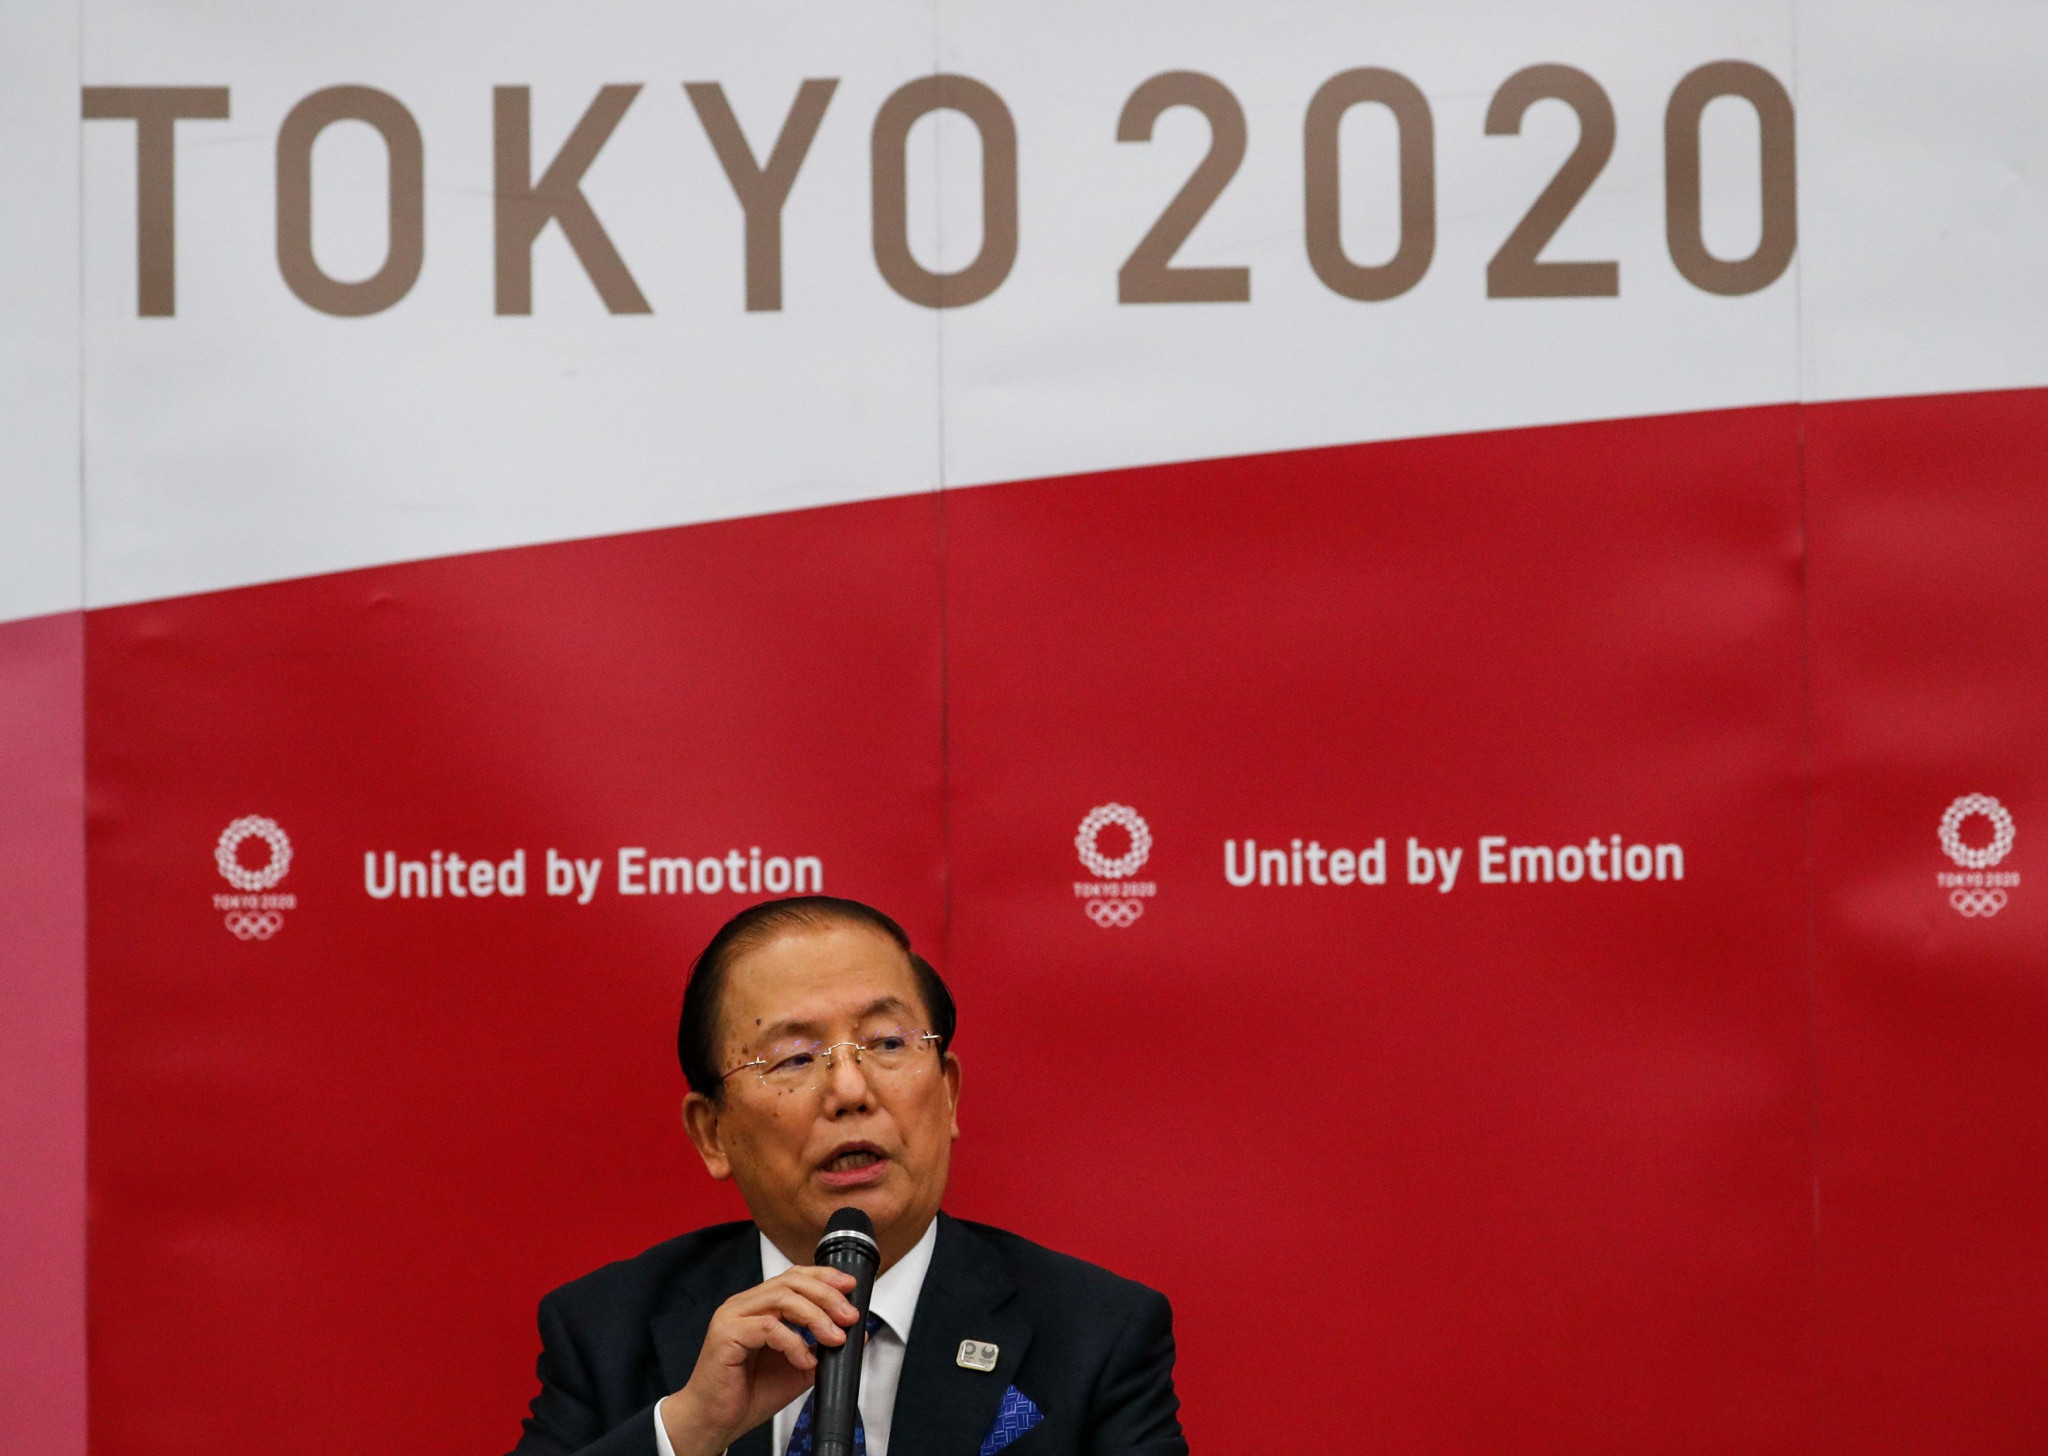 Tokyo 2020 chief executive Toshirō Mutō was among those present at the panel discussion ©Getty Images